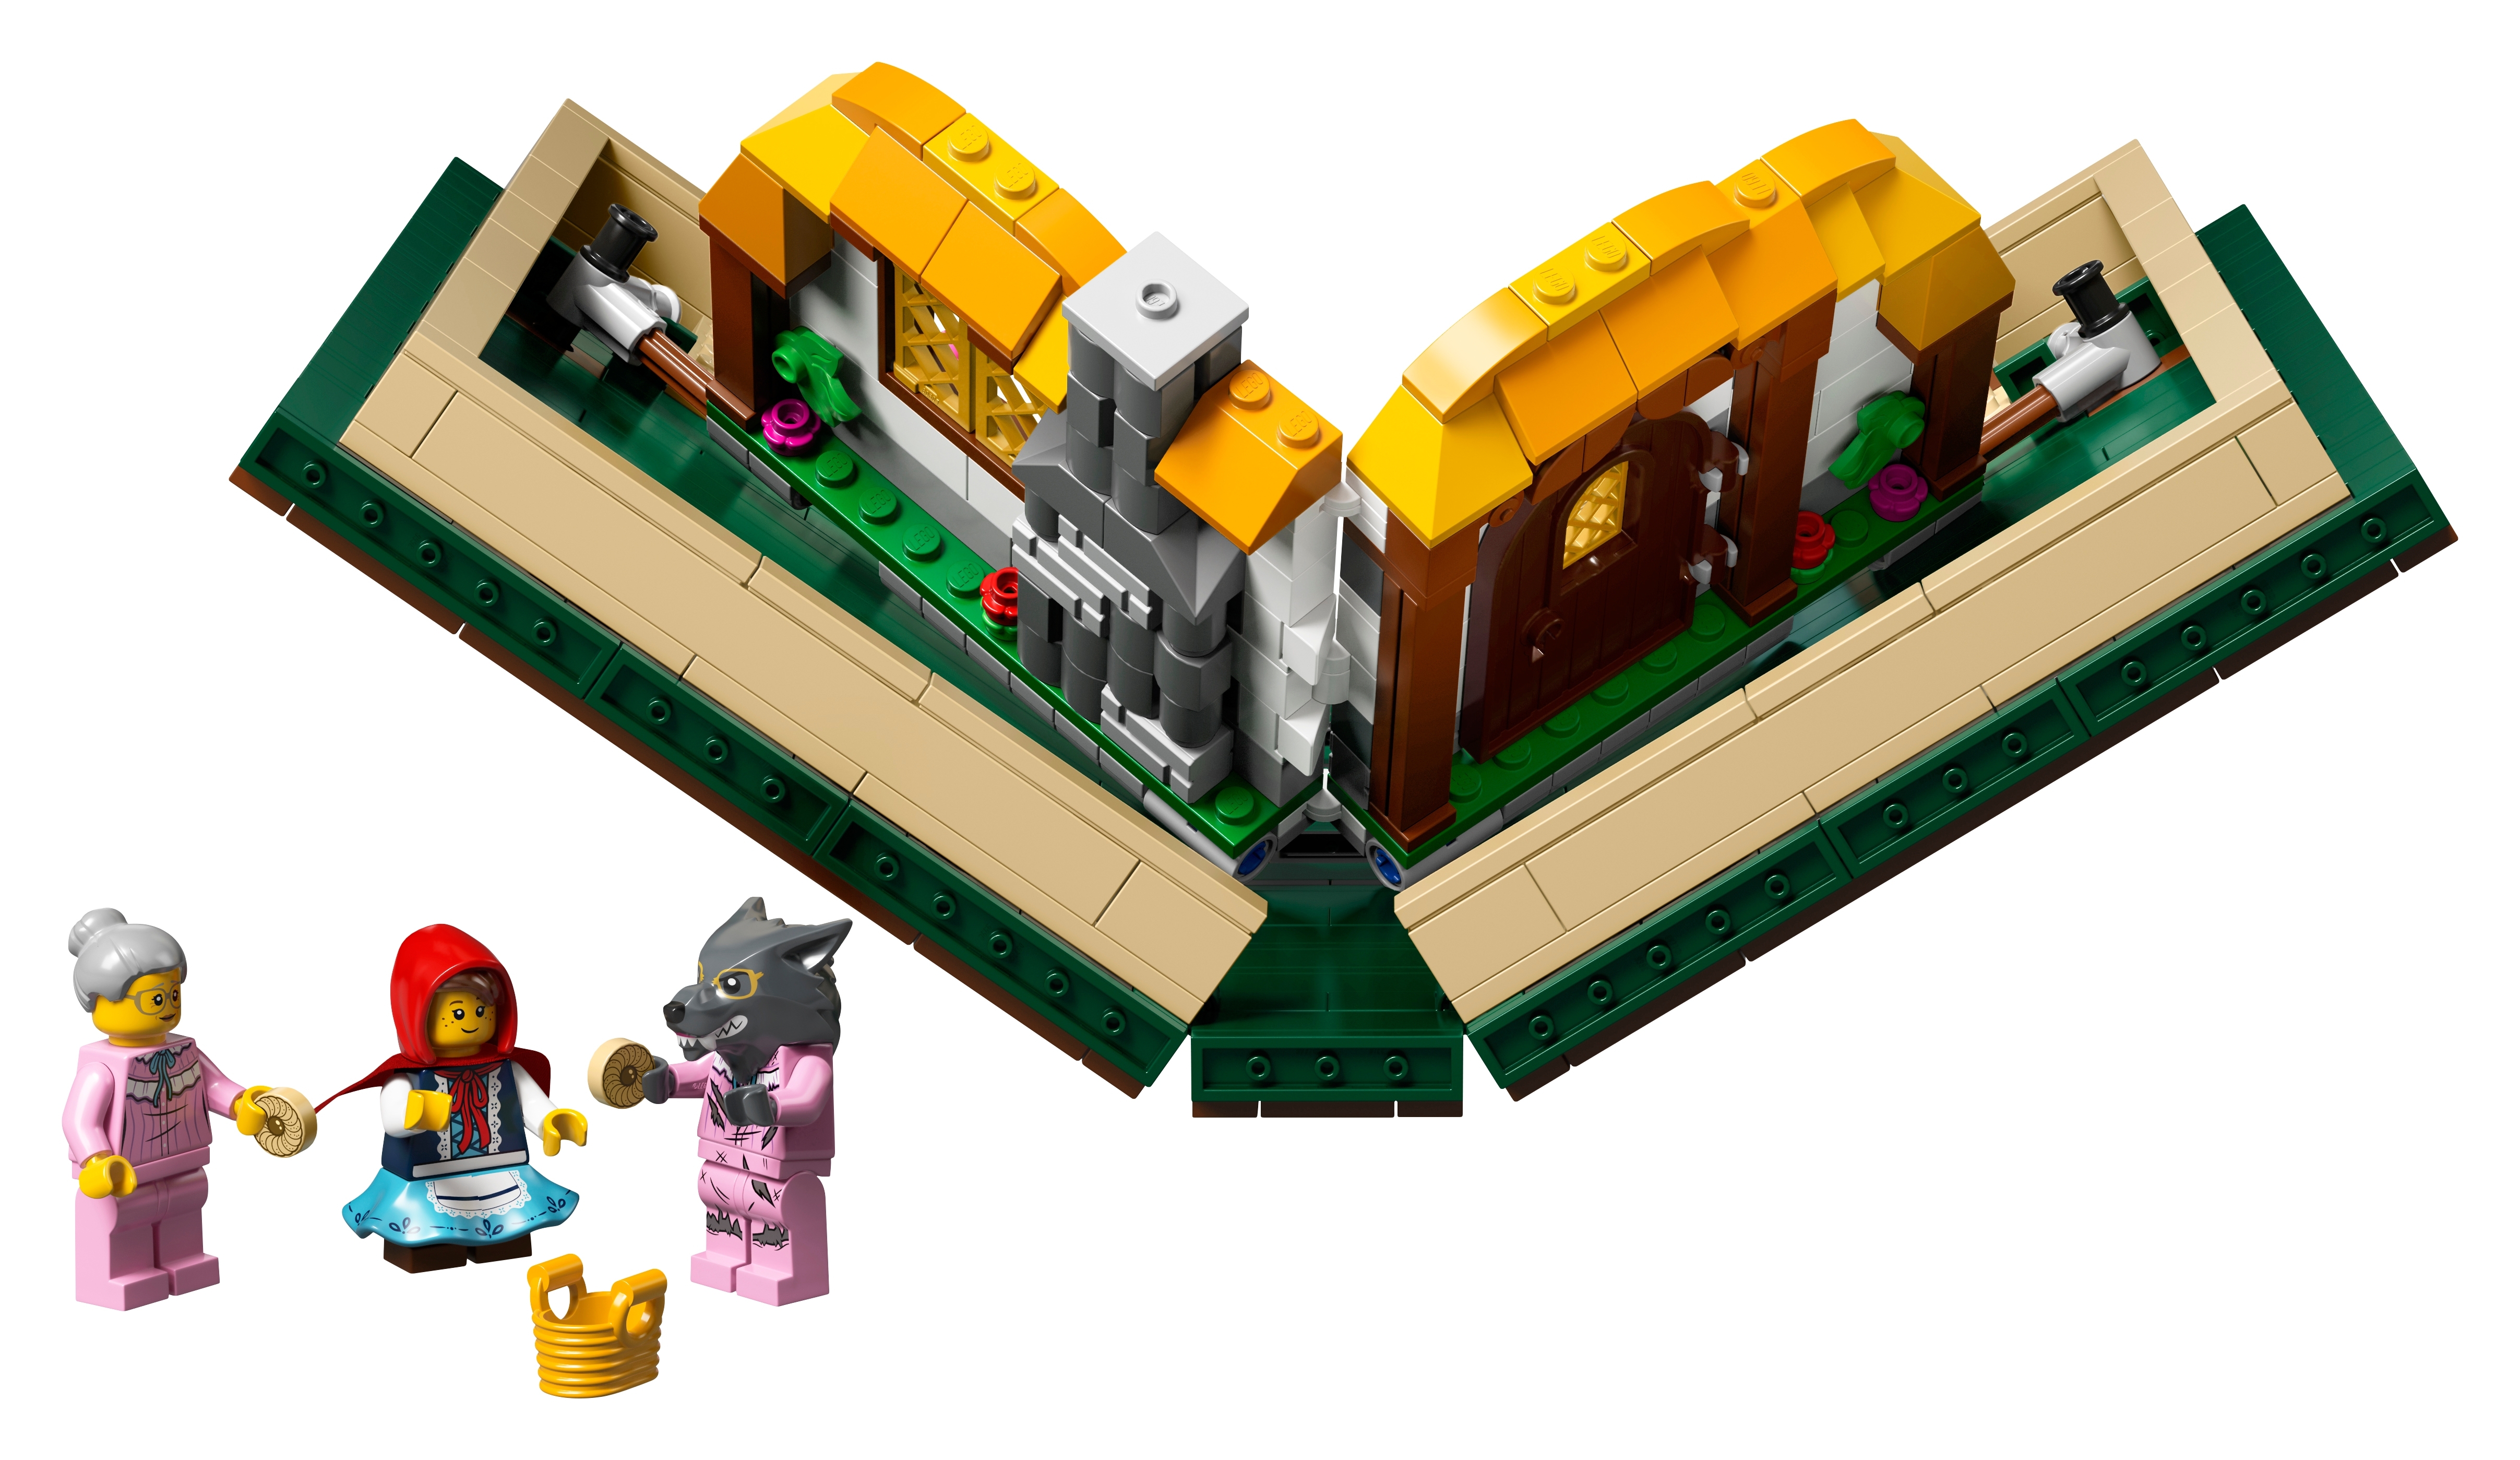 Alice in Wonderland Pop-up Book, My entry for the Lego Idea…